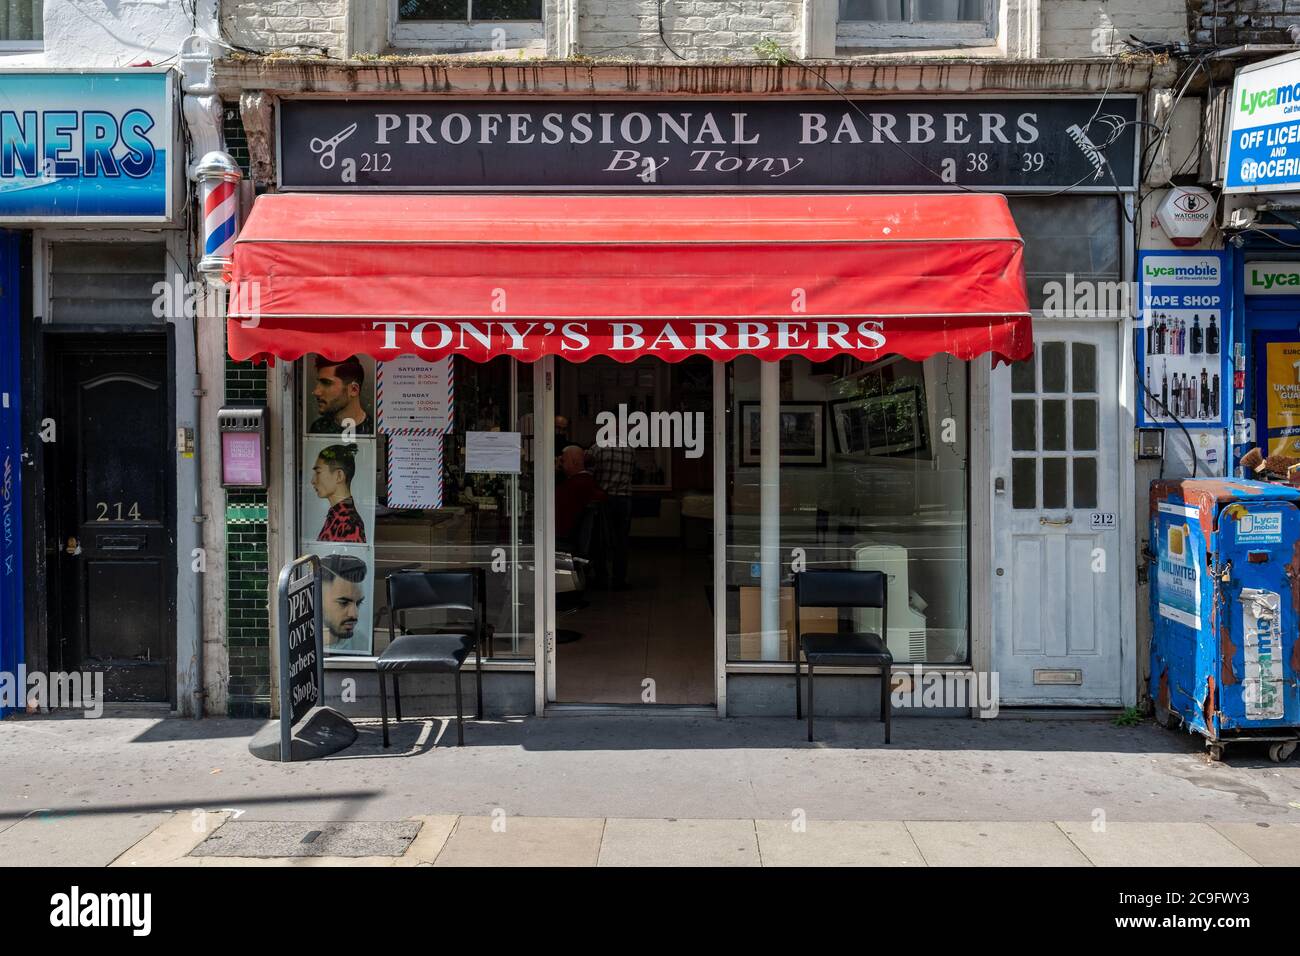 London- July, 2020: A  barber shop on London high street, a typical small independent high street business Stock Photo